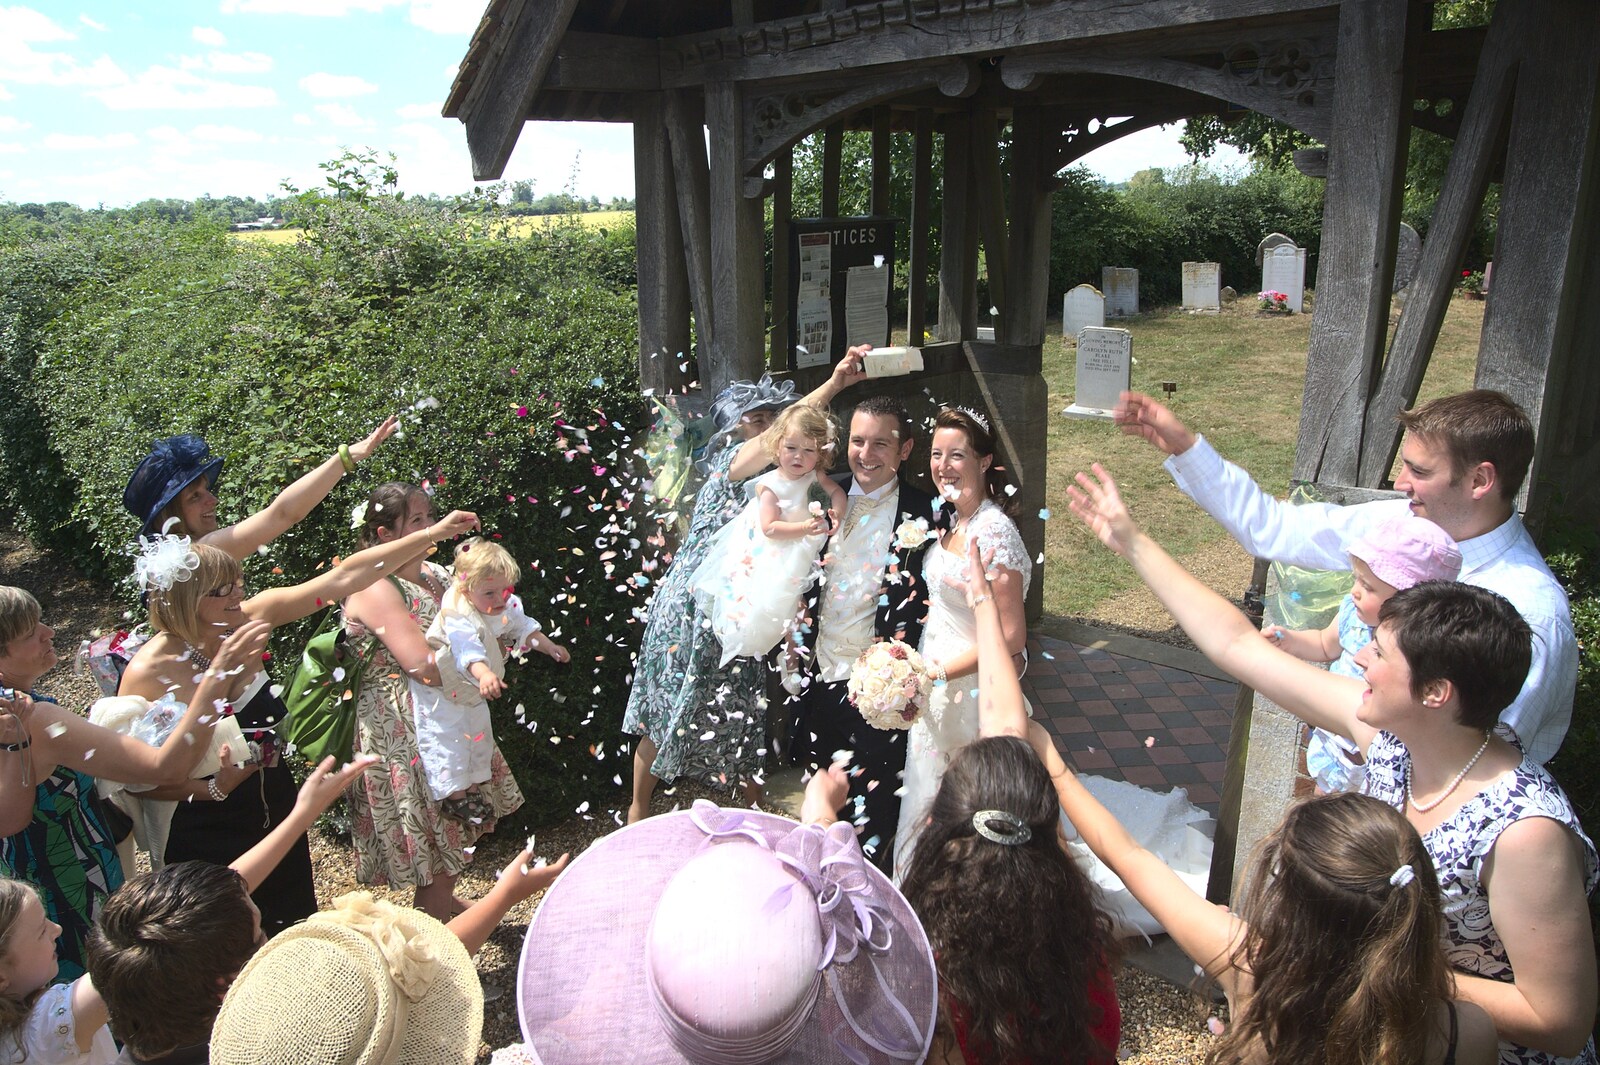 A confetti moment from Clive and Suzanne's Wedding, Oakley and Brome, Suffolk - 10th July 2010